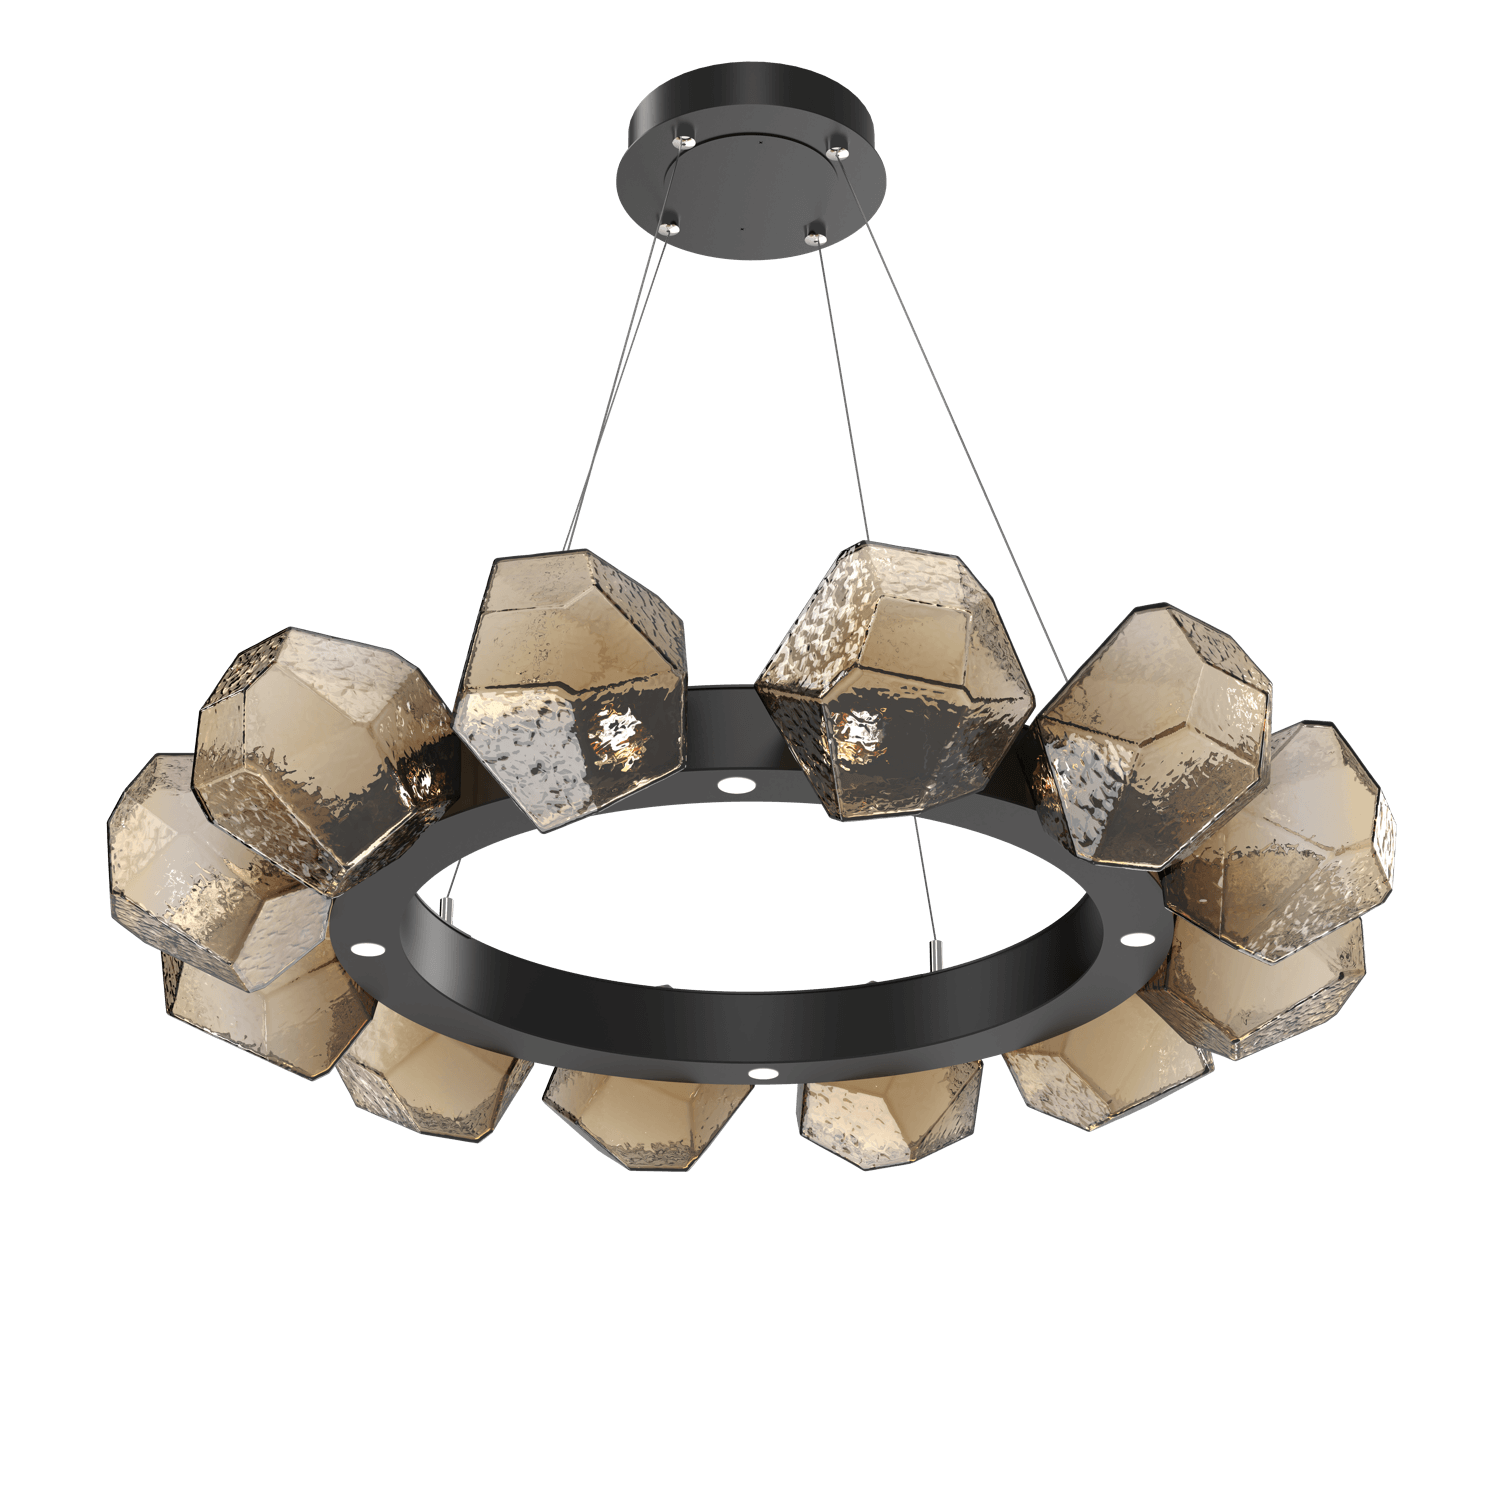 CHB0039-36-MB-B-Hammerton-Studio-Gem-36-inch-radial-ring-chandelier-with-matte-black-finish-and-bronze-blown-glass-shades-and-LED-lamping